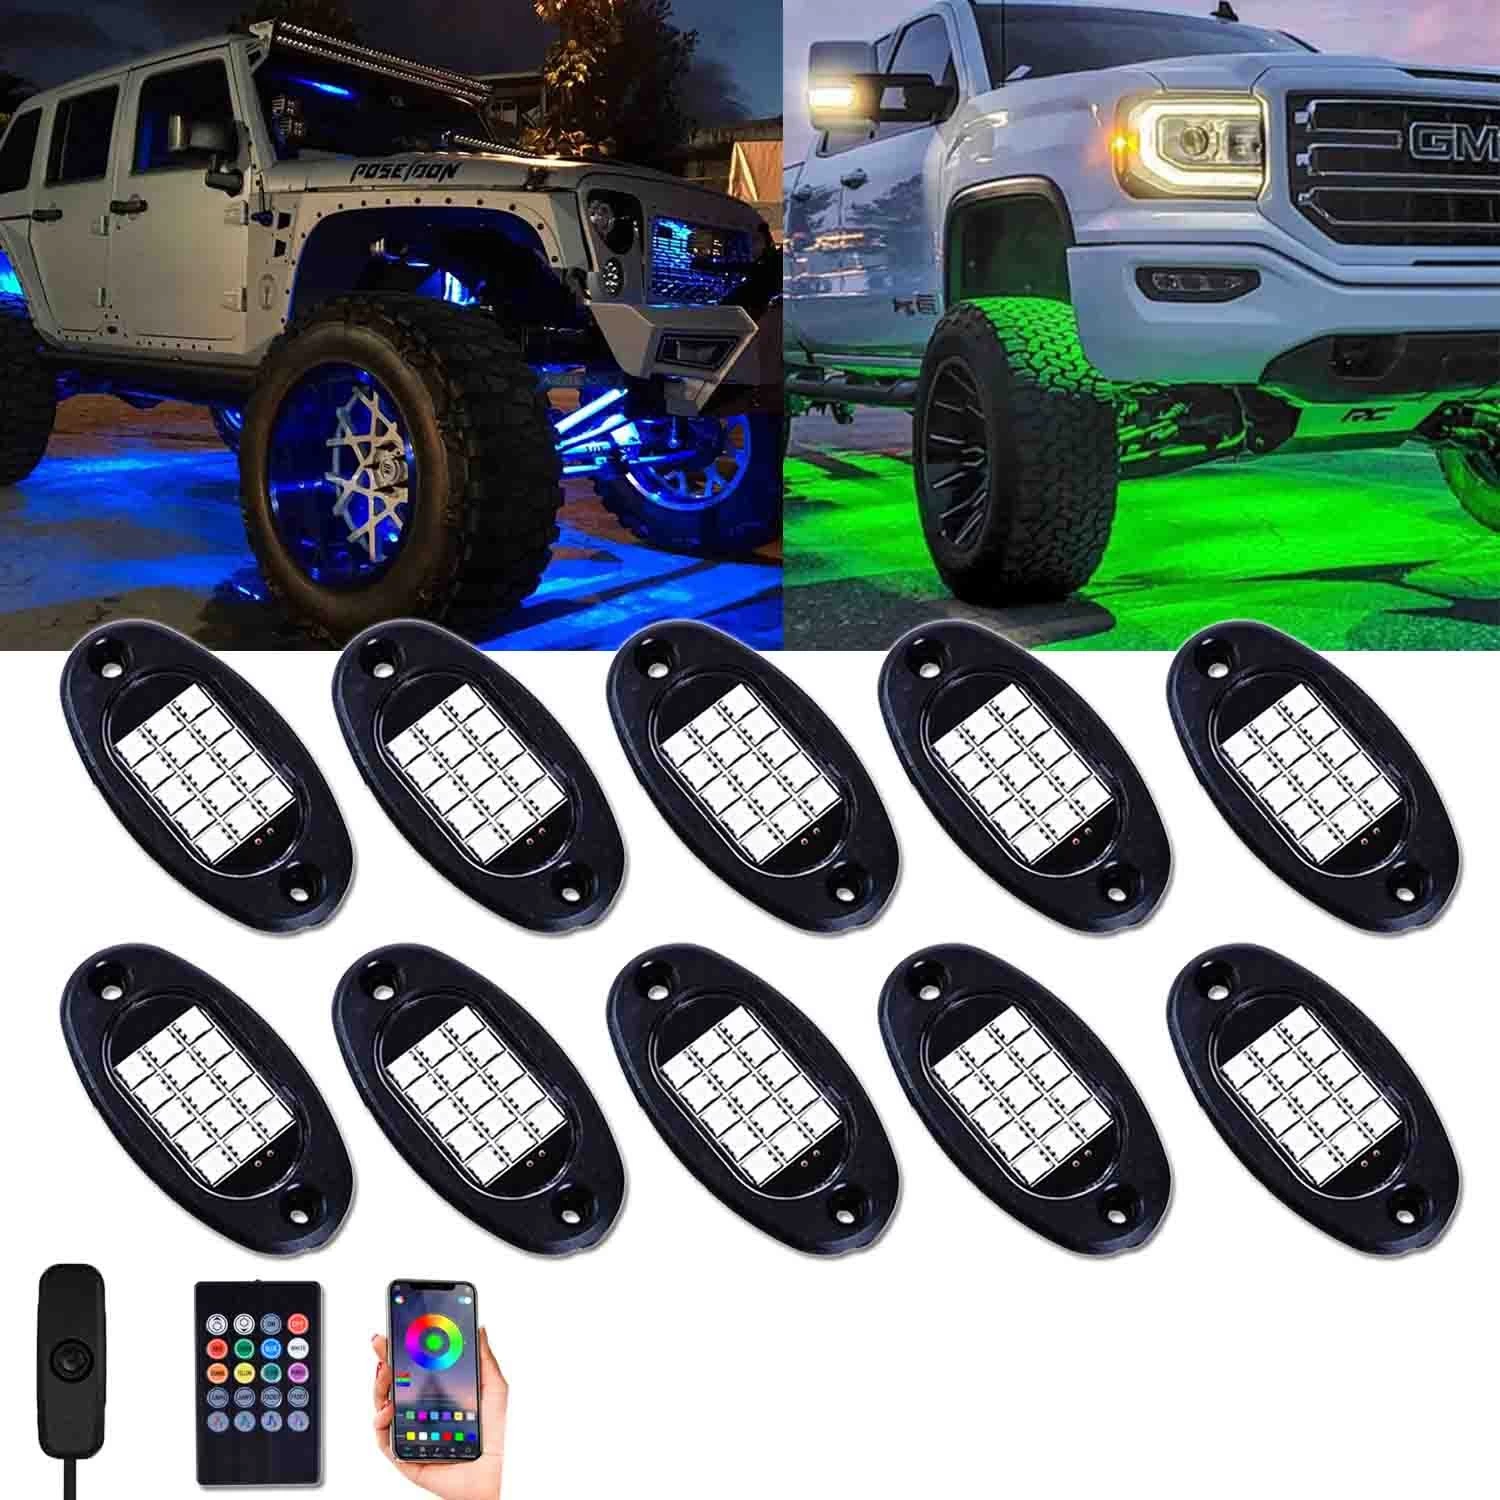 Chine Unionlux RGB LED Rock Lights 60 LEDs Multicolor Underglow Neon Lights Waterproof Aluminum Light Kit with RF/APP Control Music Mode Timing Function for Truck Jeep Off Road Car UTV ATV SUV 8 Packs fabricant